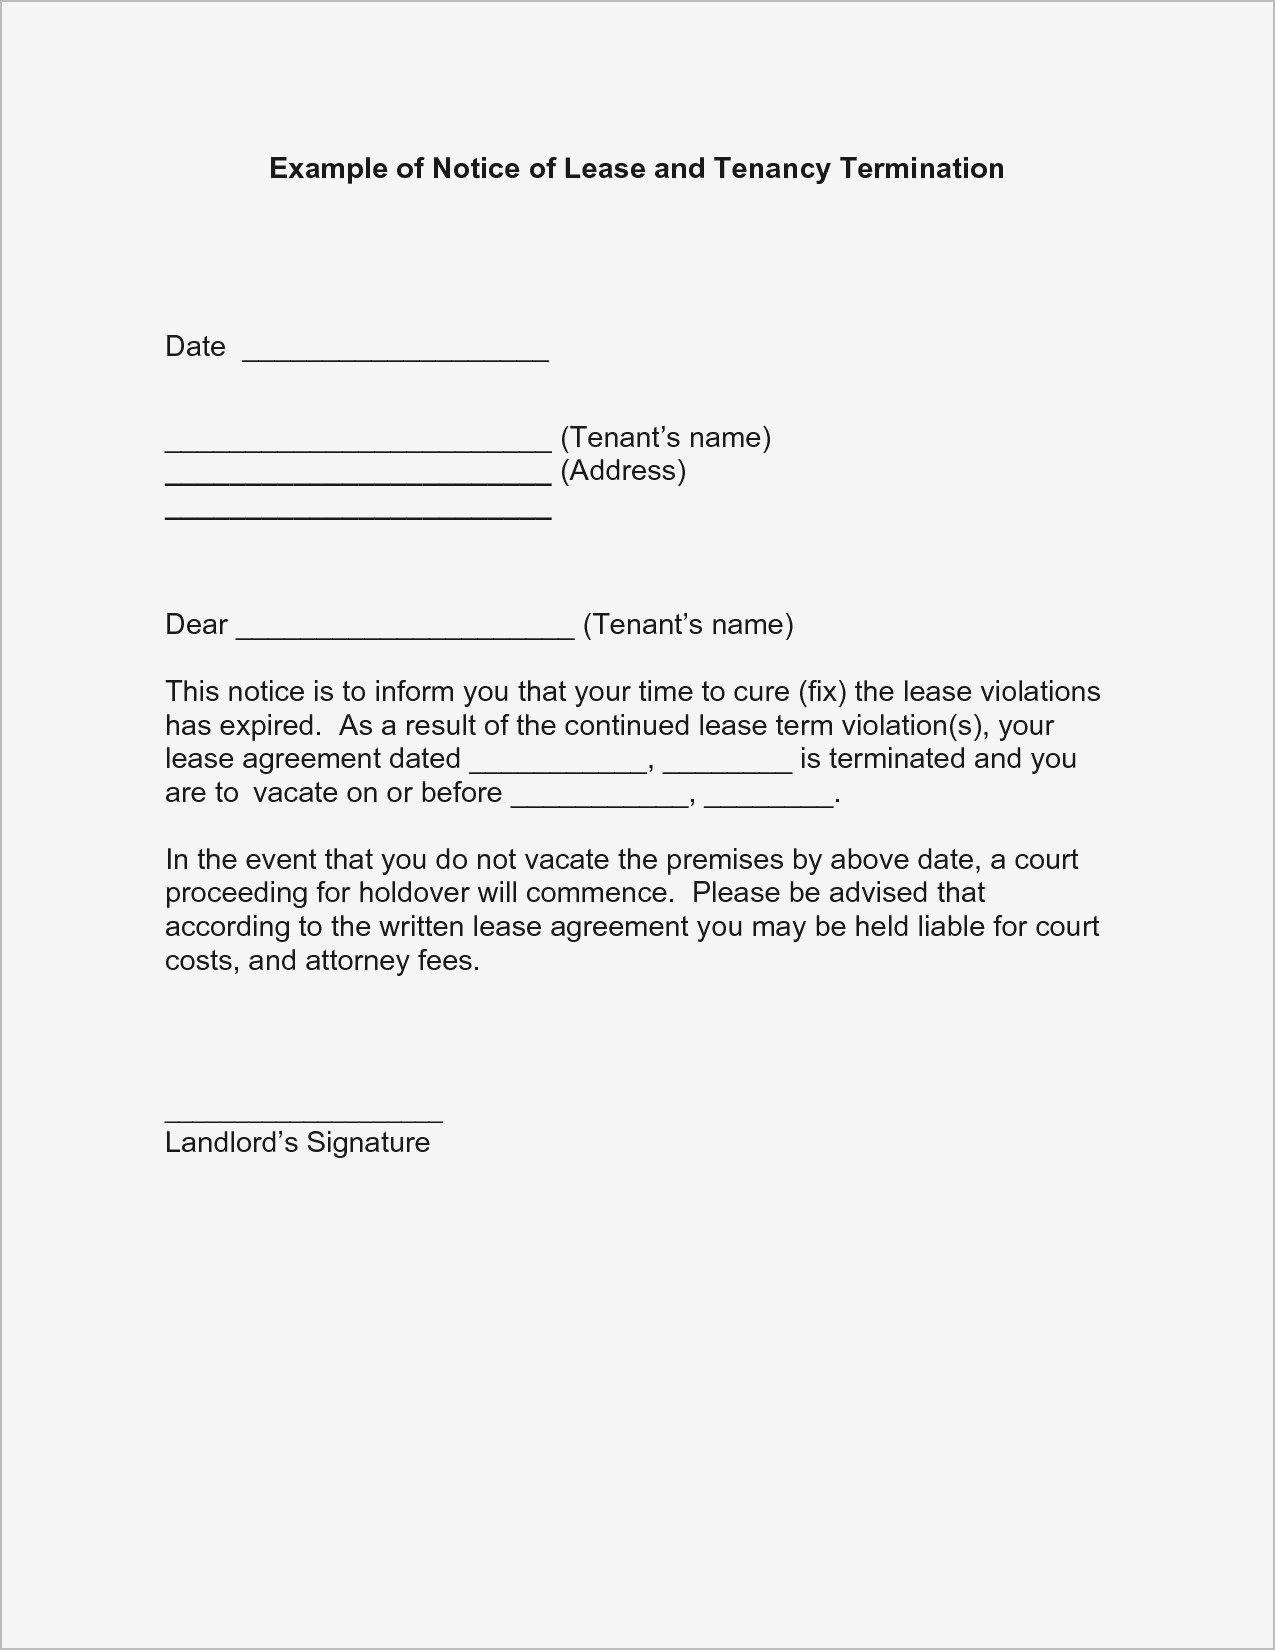 Early Termination Of Lease Agreement Template